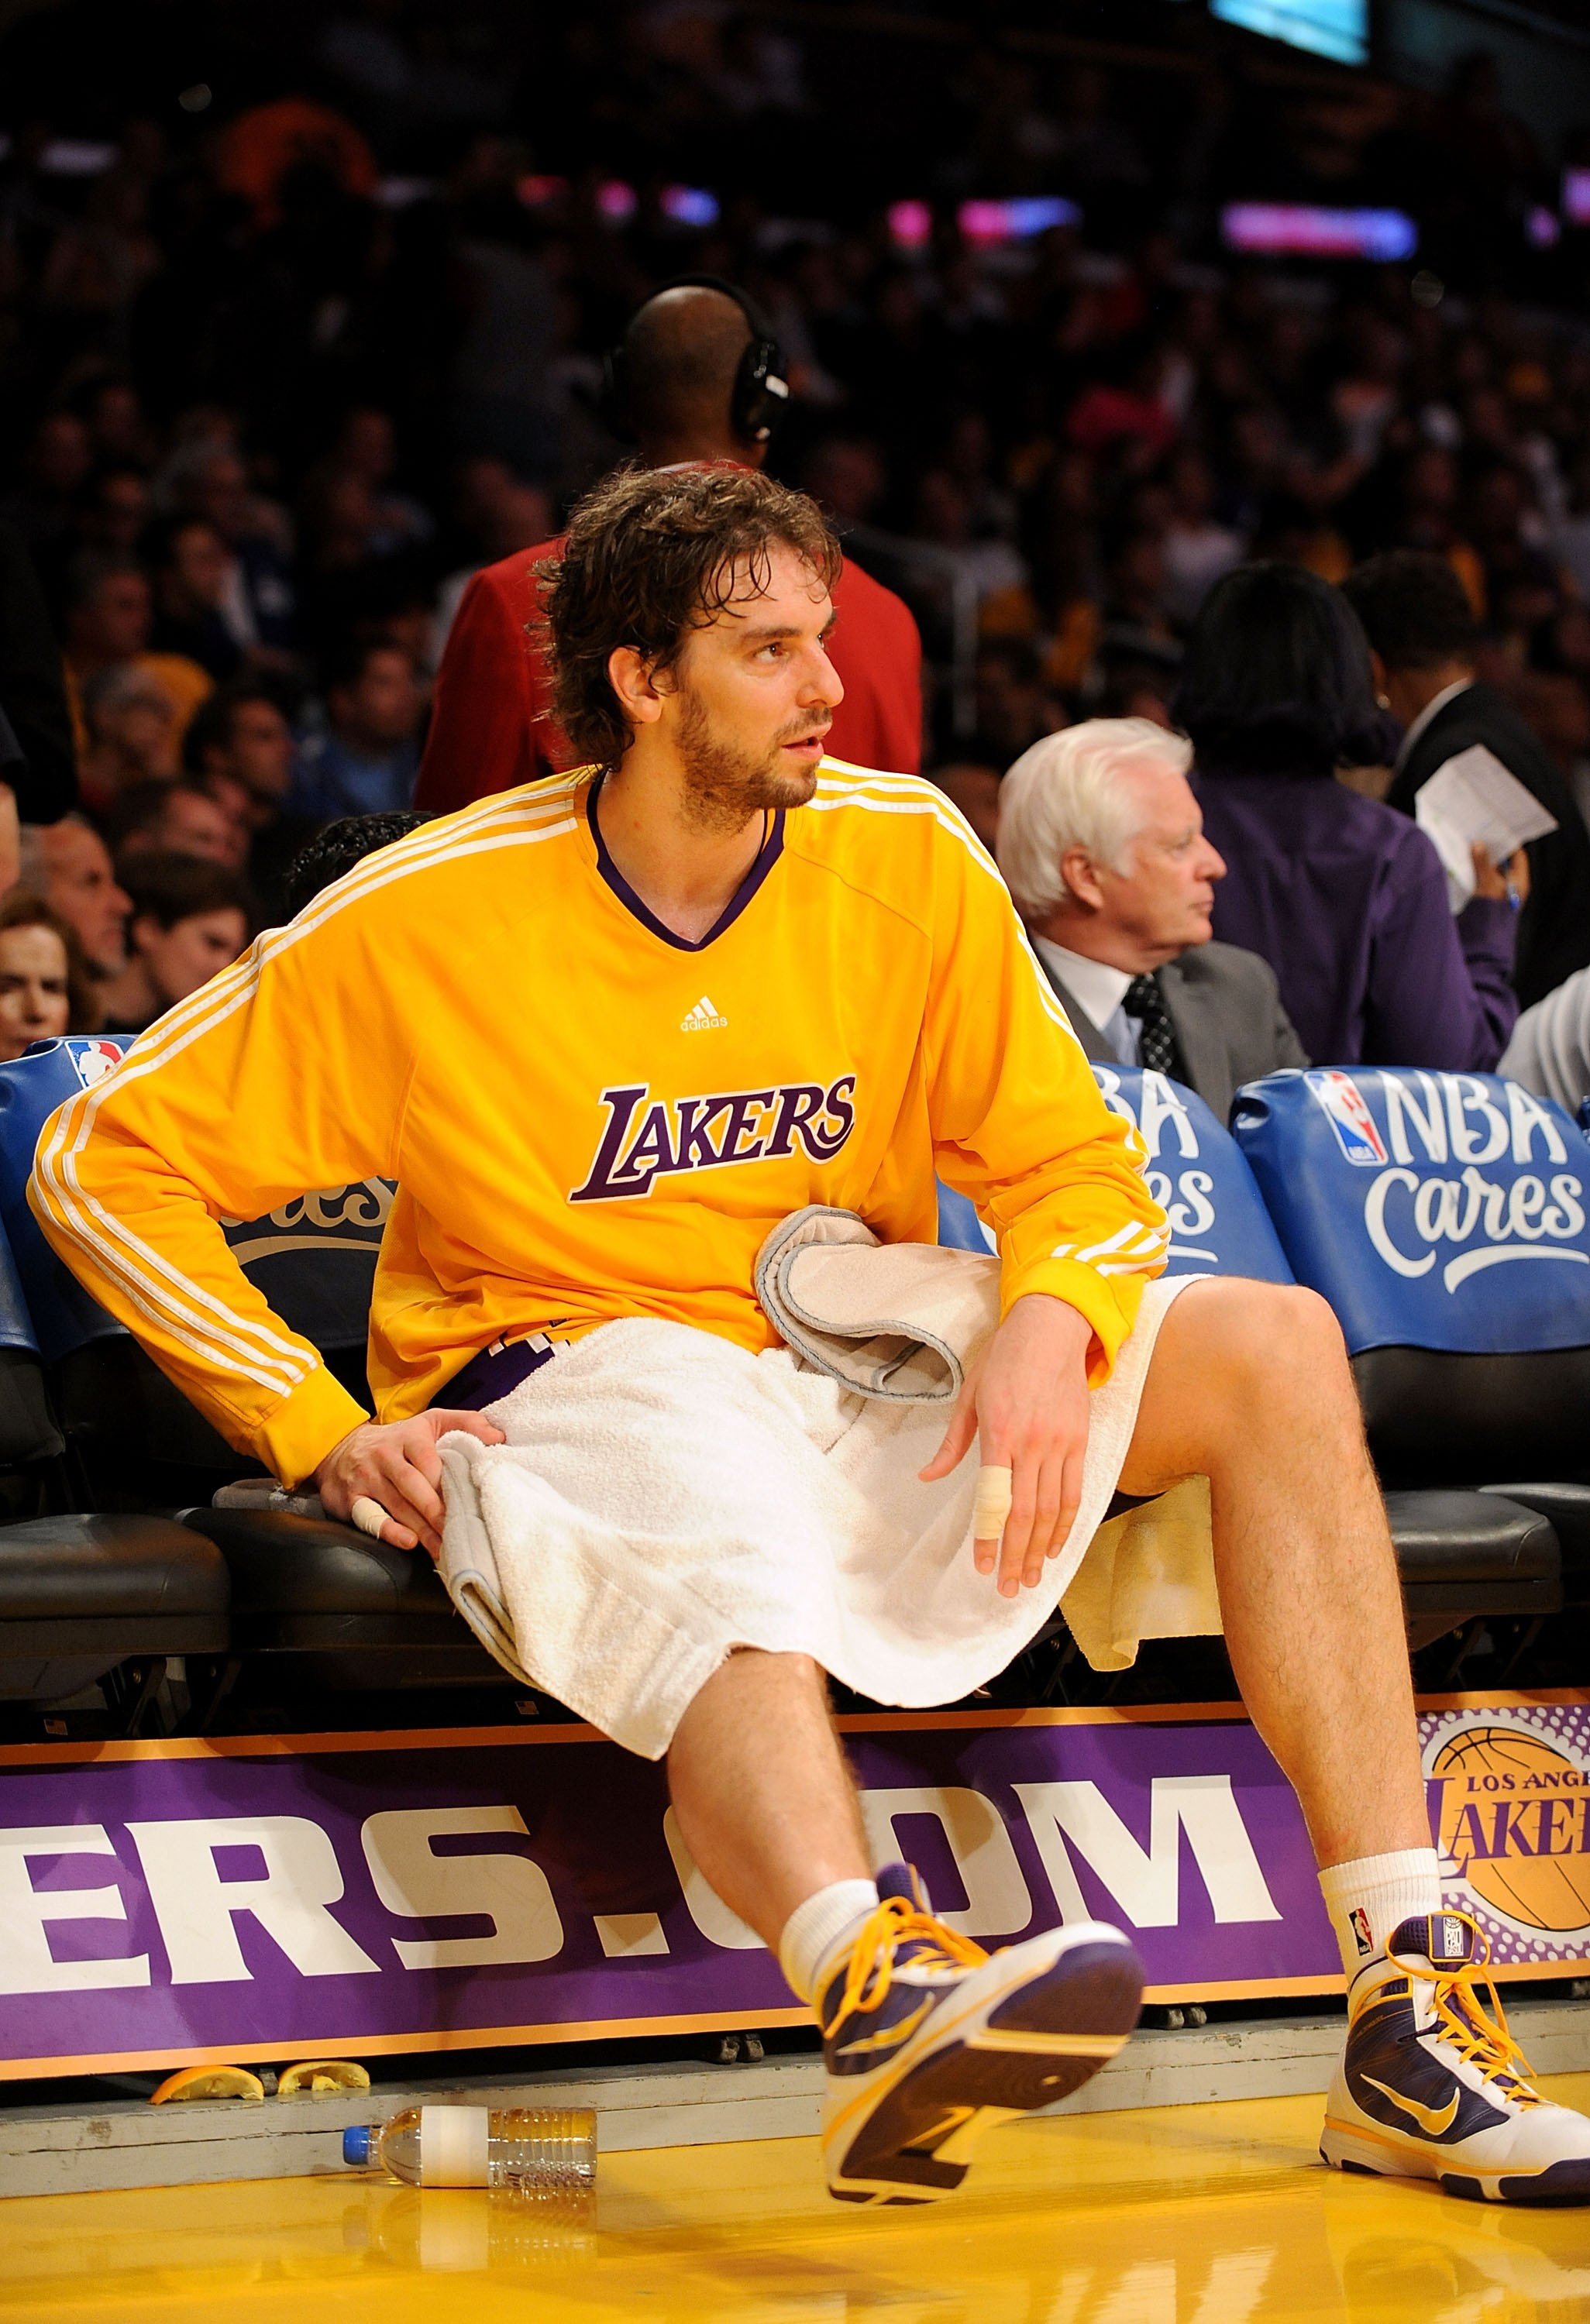 LOS ANGELES, CA - NOVEMBER 19:  Pau Gasol #16 of the Los Angeles Lakers rests on the bench during a timeout in the game against the Chicago Bulls on November 19, 2009 at Staples Center in Los Angeles, California. NOTE TO USER: User expressly acknowledges